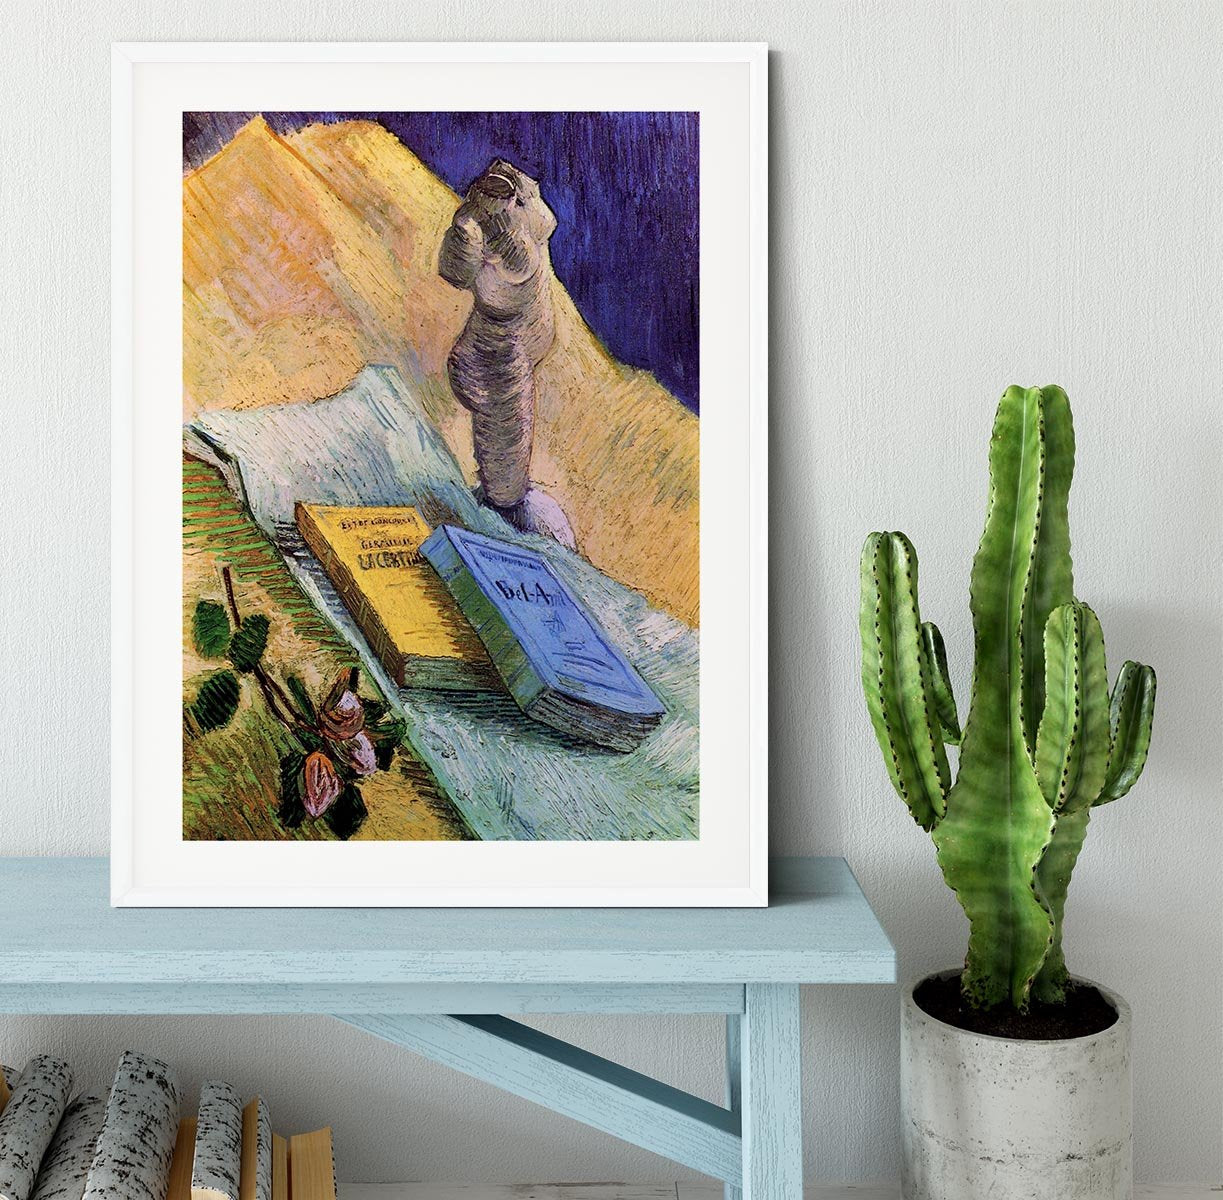 Still Life with Plaster Statuette a Rose and Two Novels by Van Gogh Framed Print - Canvas Art Rocks - 5